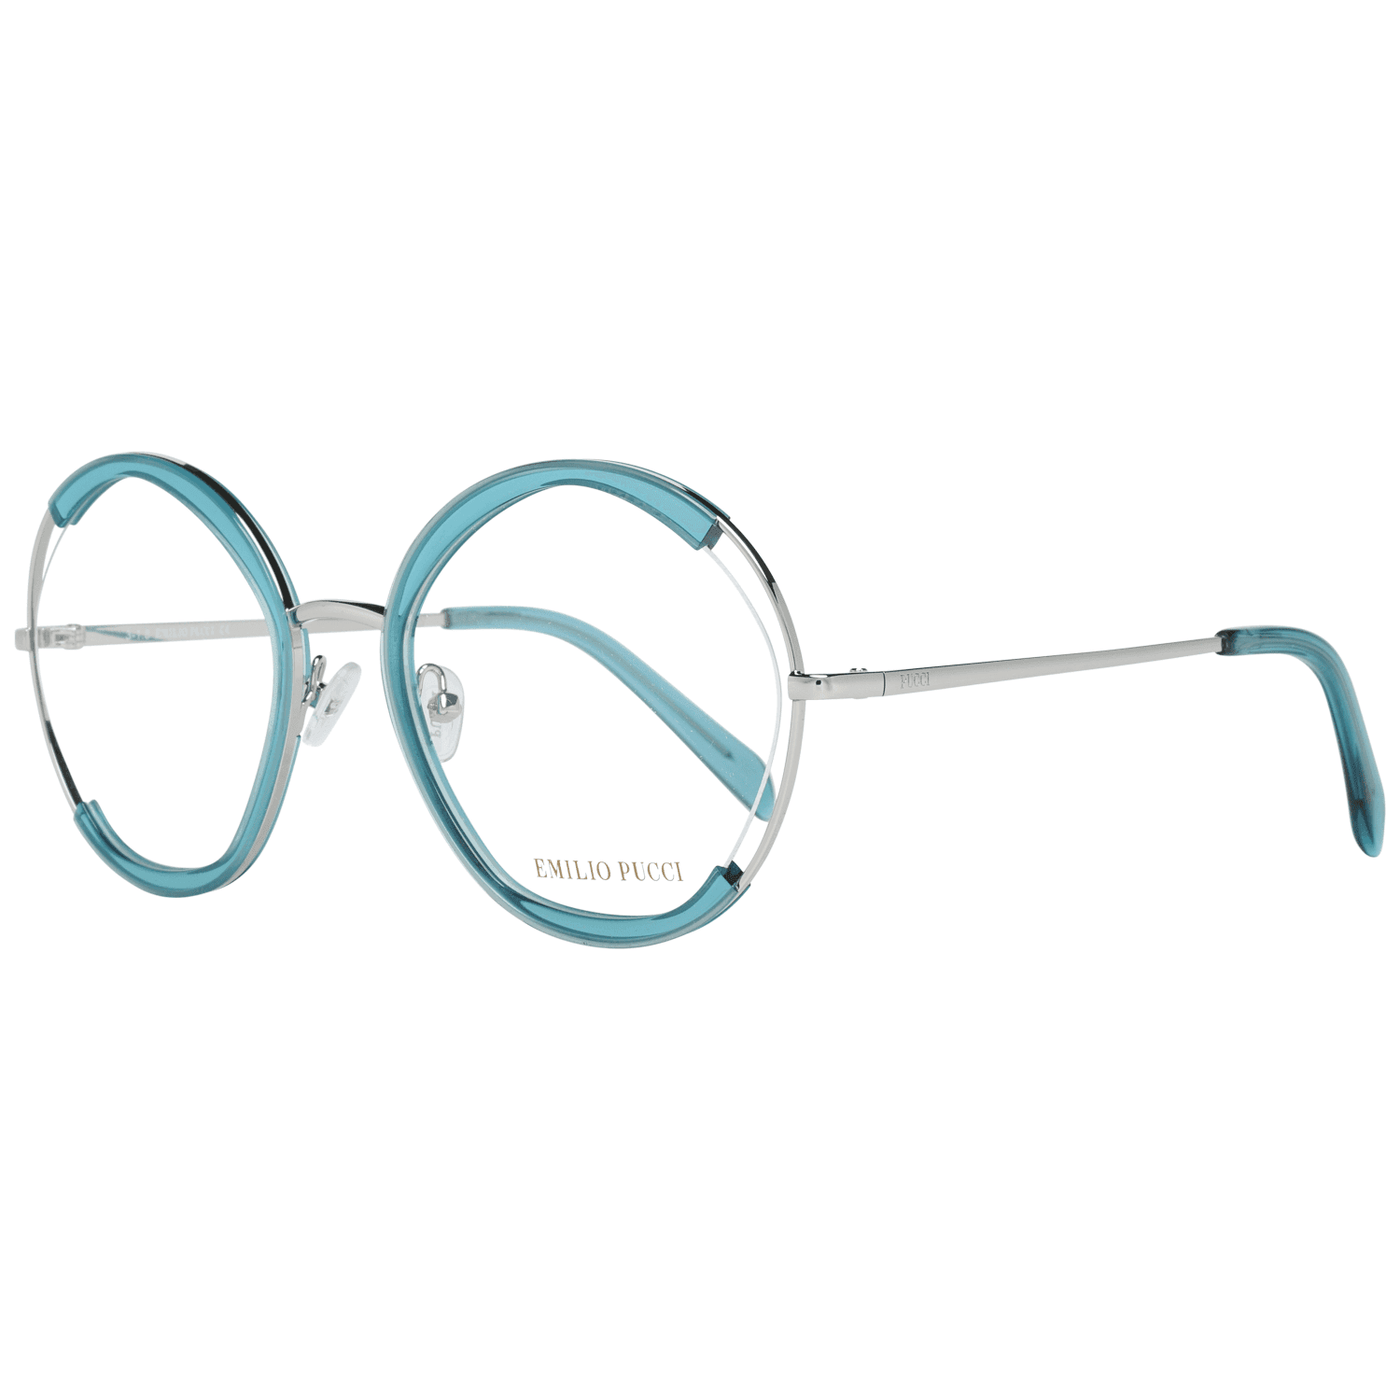 Emilio Pucci Turquoise Women Optical Frames #women, Emilio Pucci, feed-agegroup-adult, feed-gender-female, Frames for Women - Frames, Turquoise at SEYMAYKA